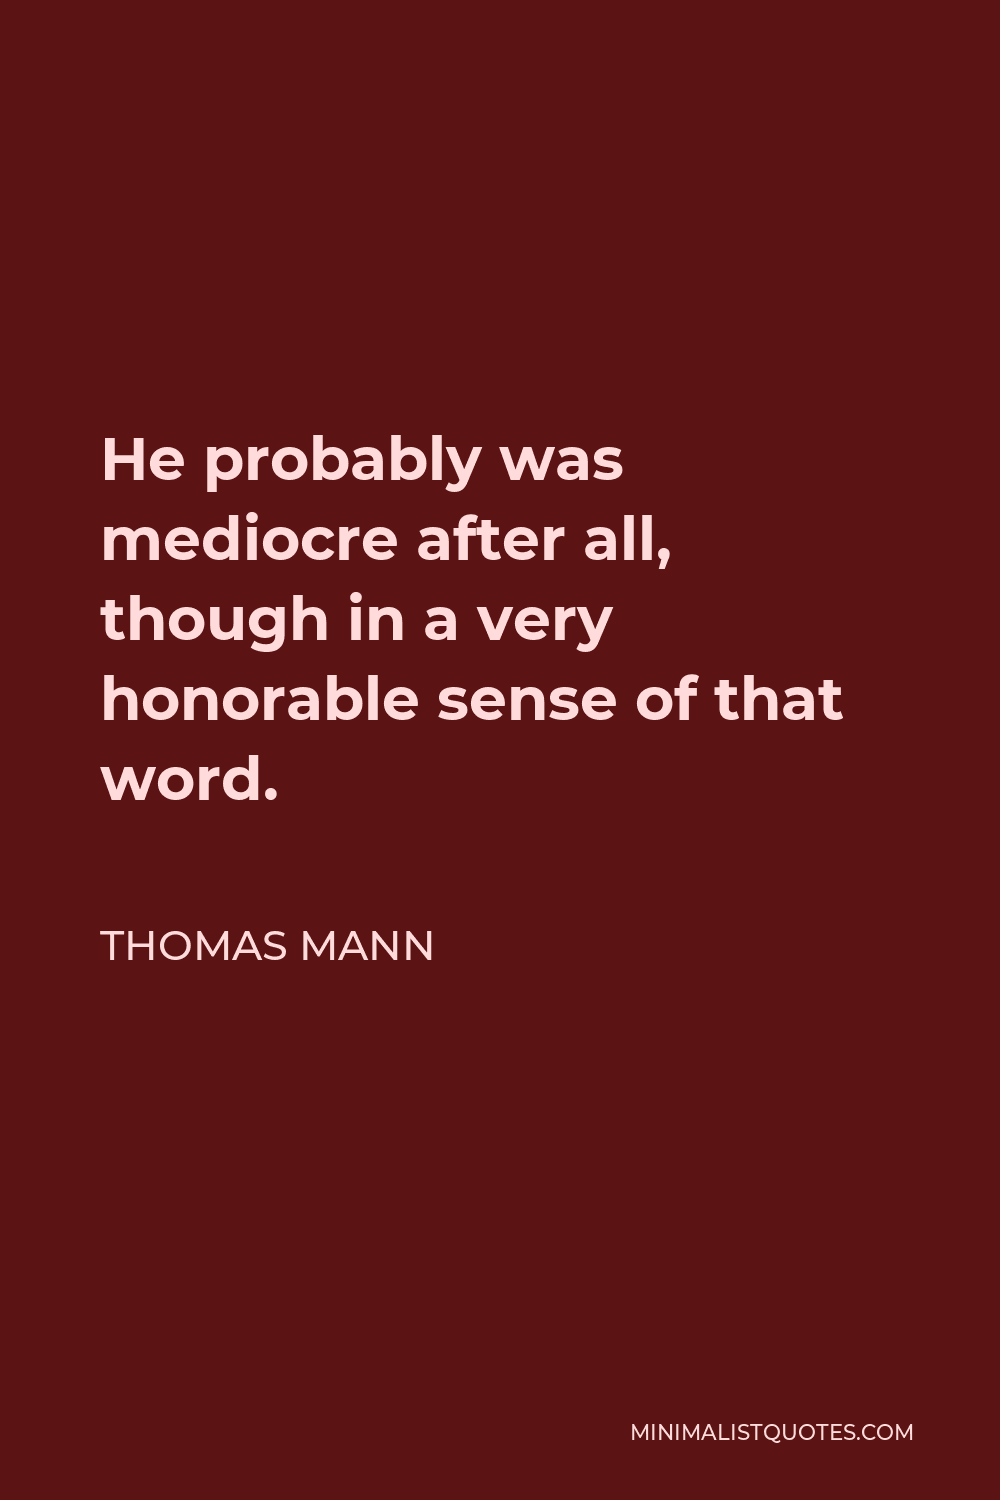 Thomas Mann Quote - He probably was mediocre after all, though in a very honorable sense of that word.